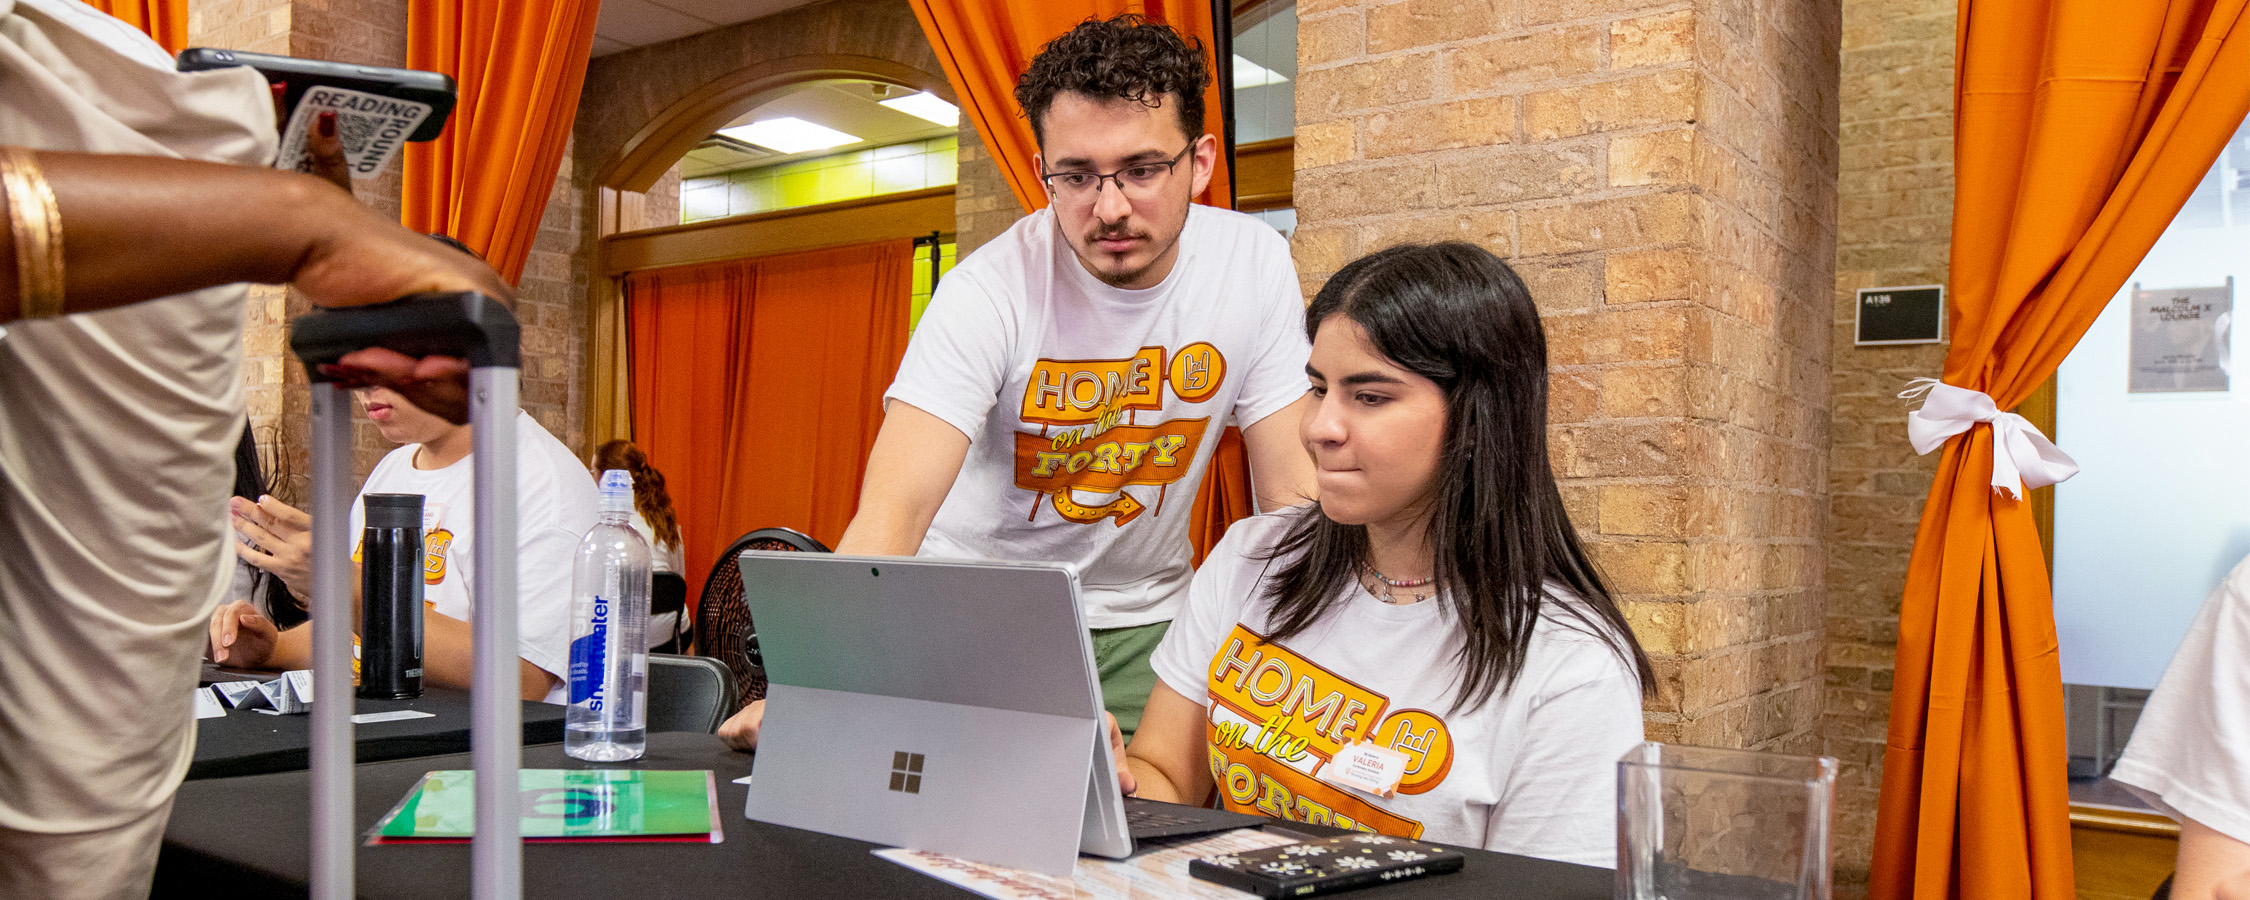 Two UT students check guests in on a tablet at New Student Orientation